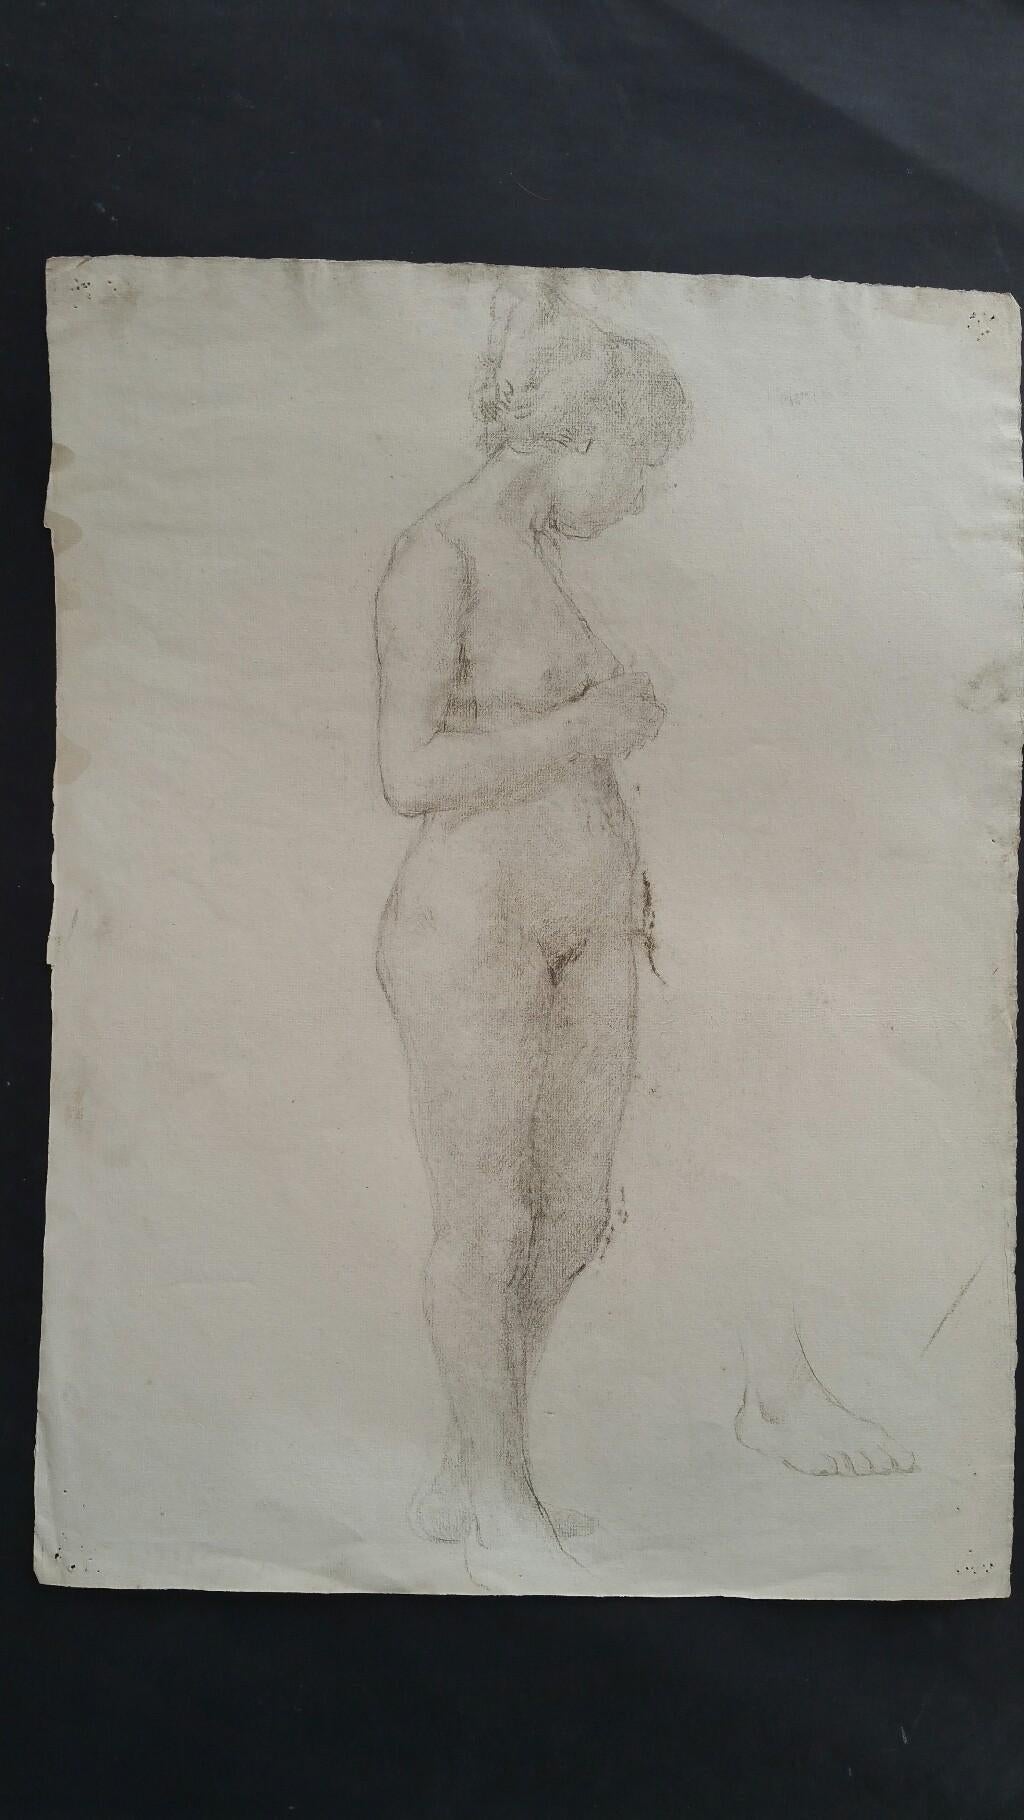 English graphite sketch of a female nude, standing.
by Henry George Moon (British 1857-1905).
On off white artists paper, unframed.
Measurements: sheet 21 x 15.5 inches.

Provenance: from the artists estate.

Condition report: pin holes to